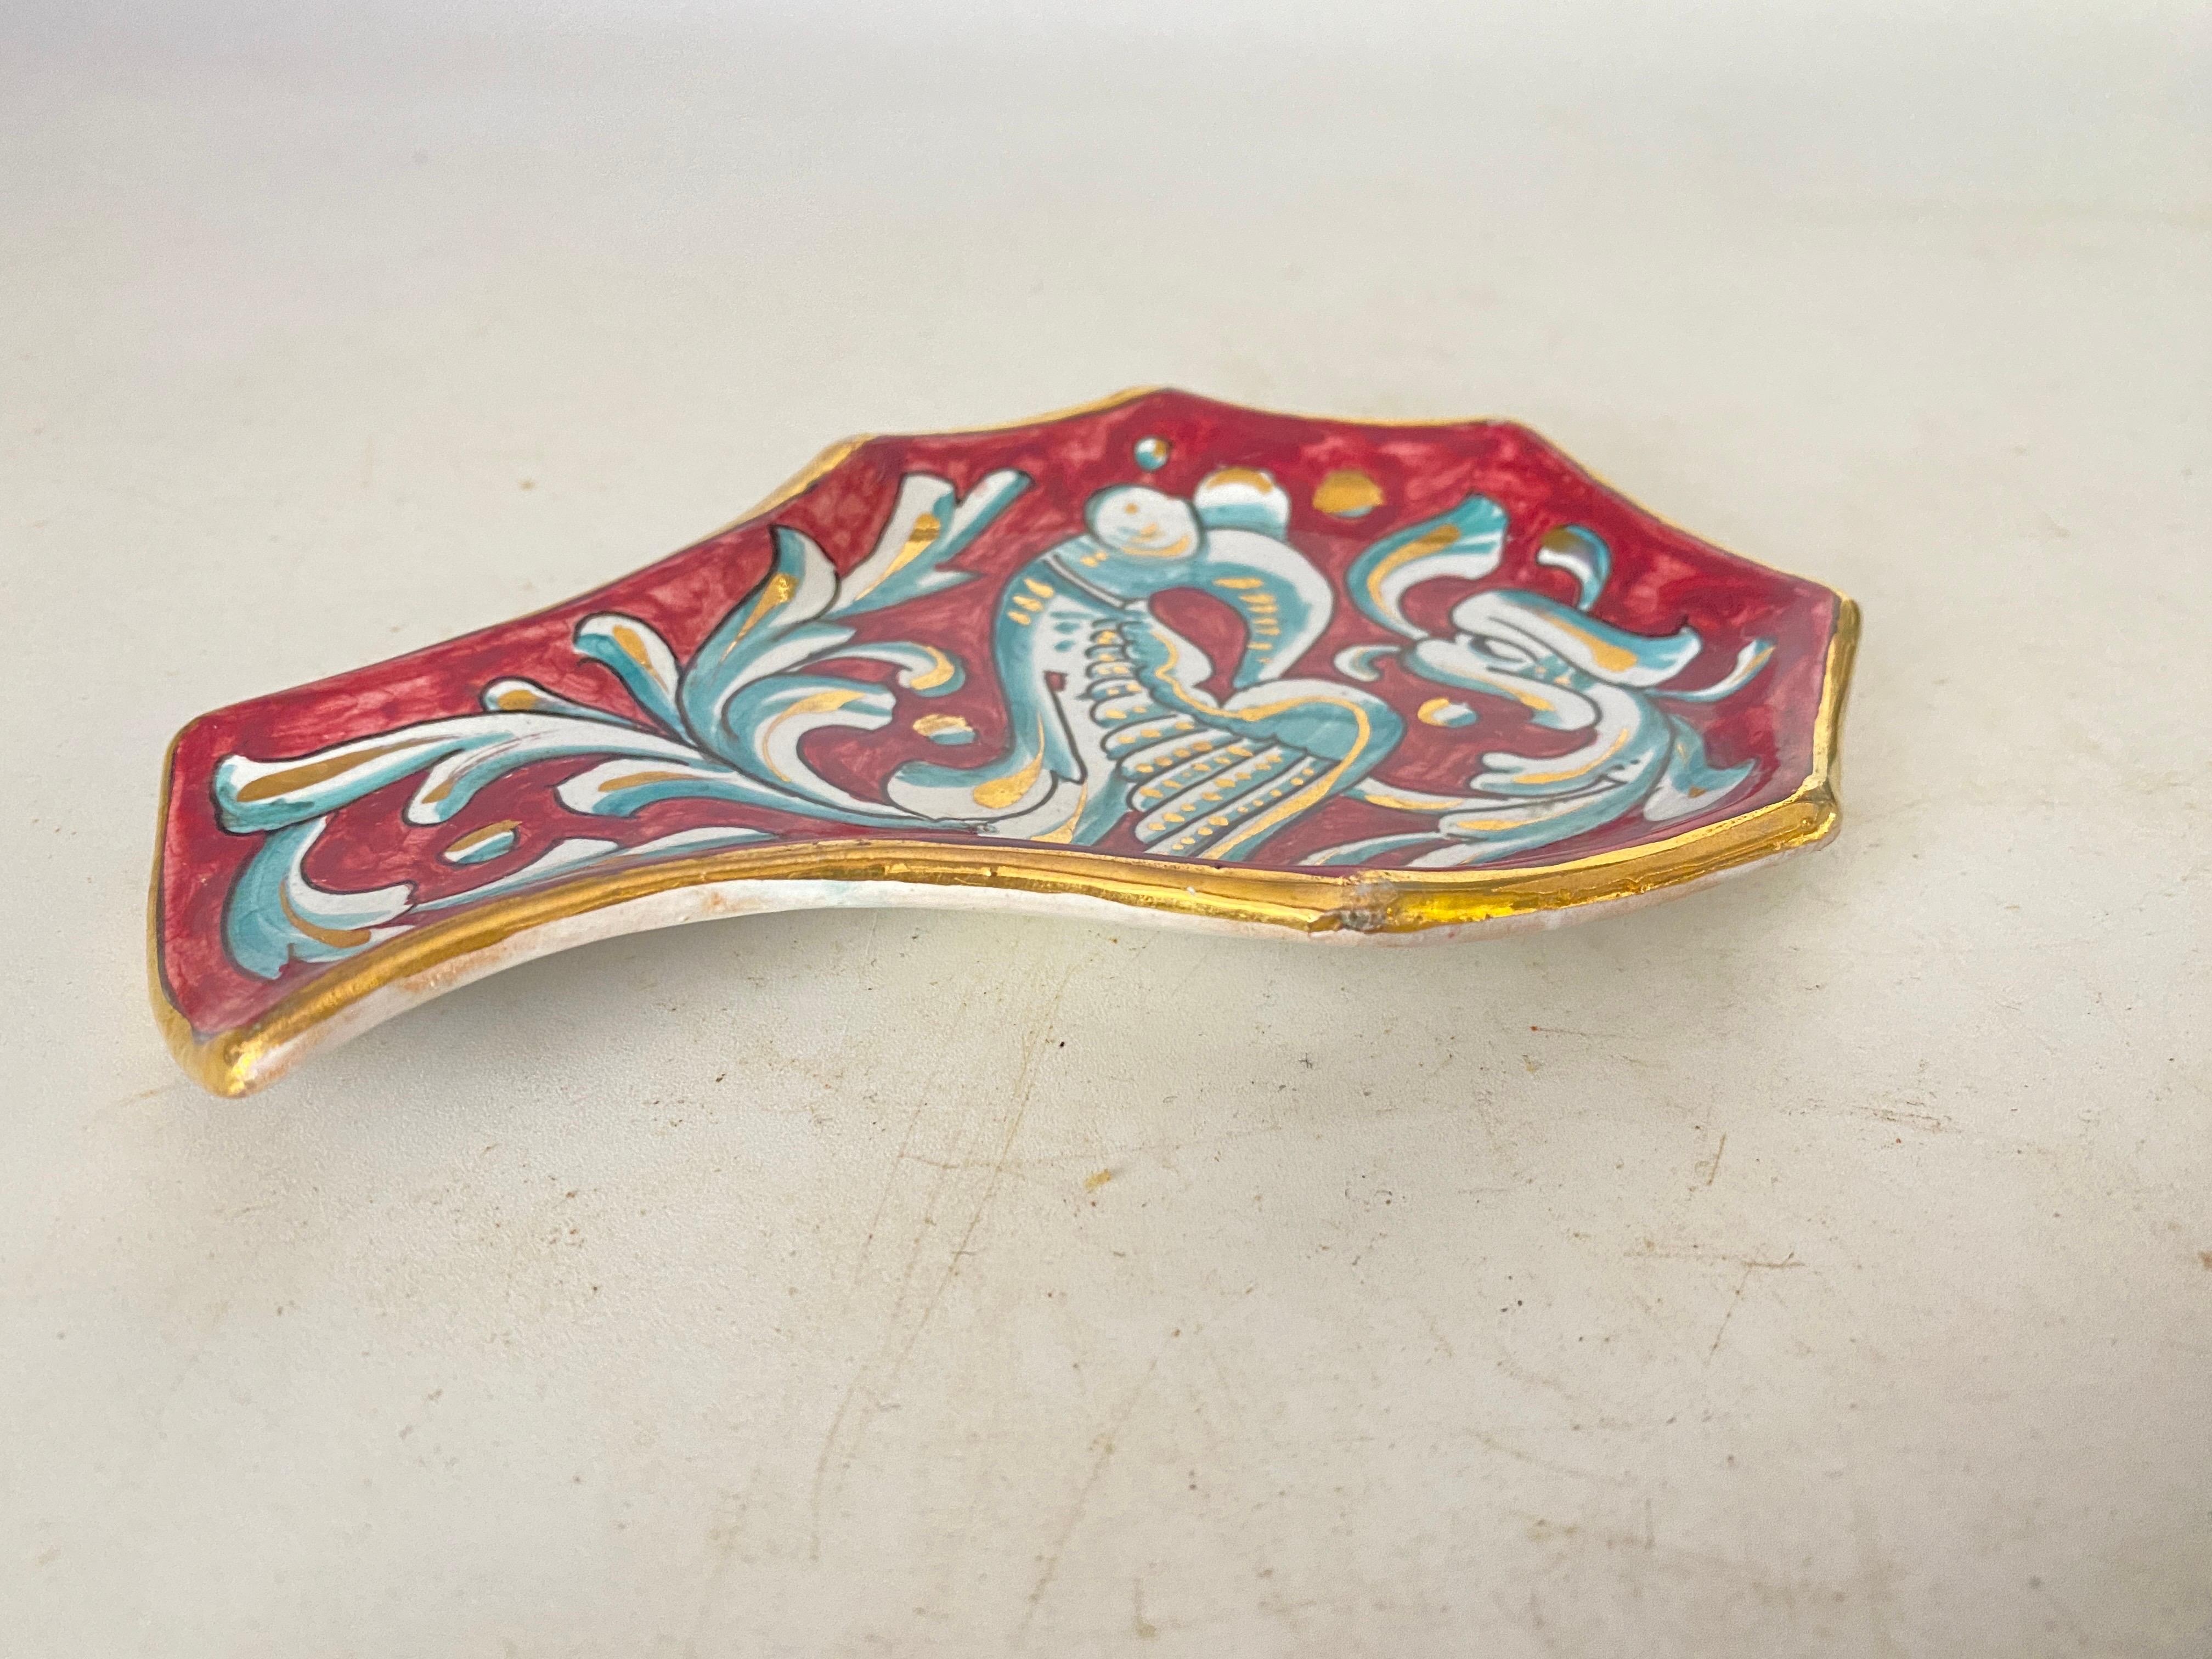 Mid-Century Modern Ceramic Red Ashtray or Vide Poche in a Shell Form Circa 1960 Italy For Sale